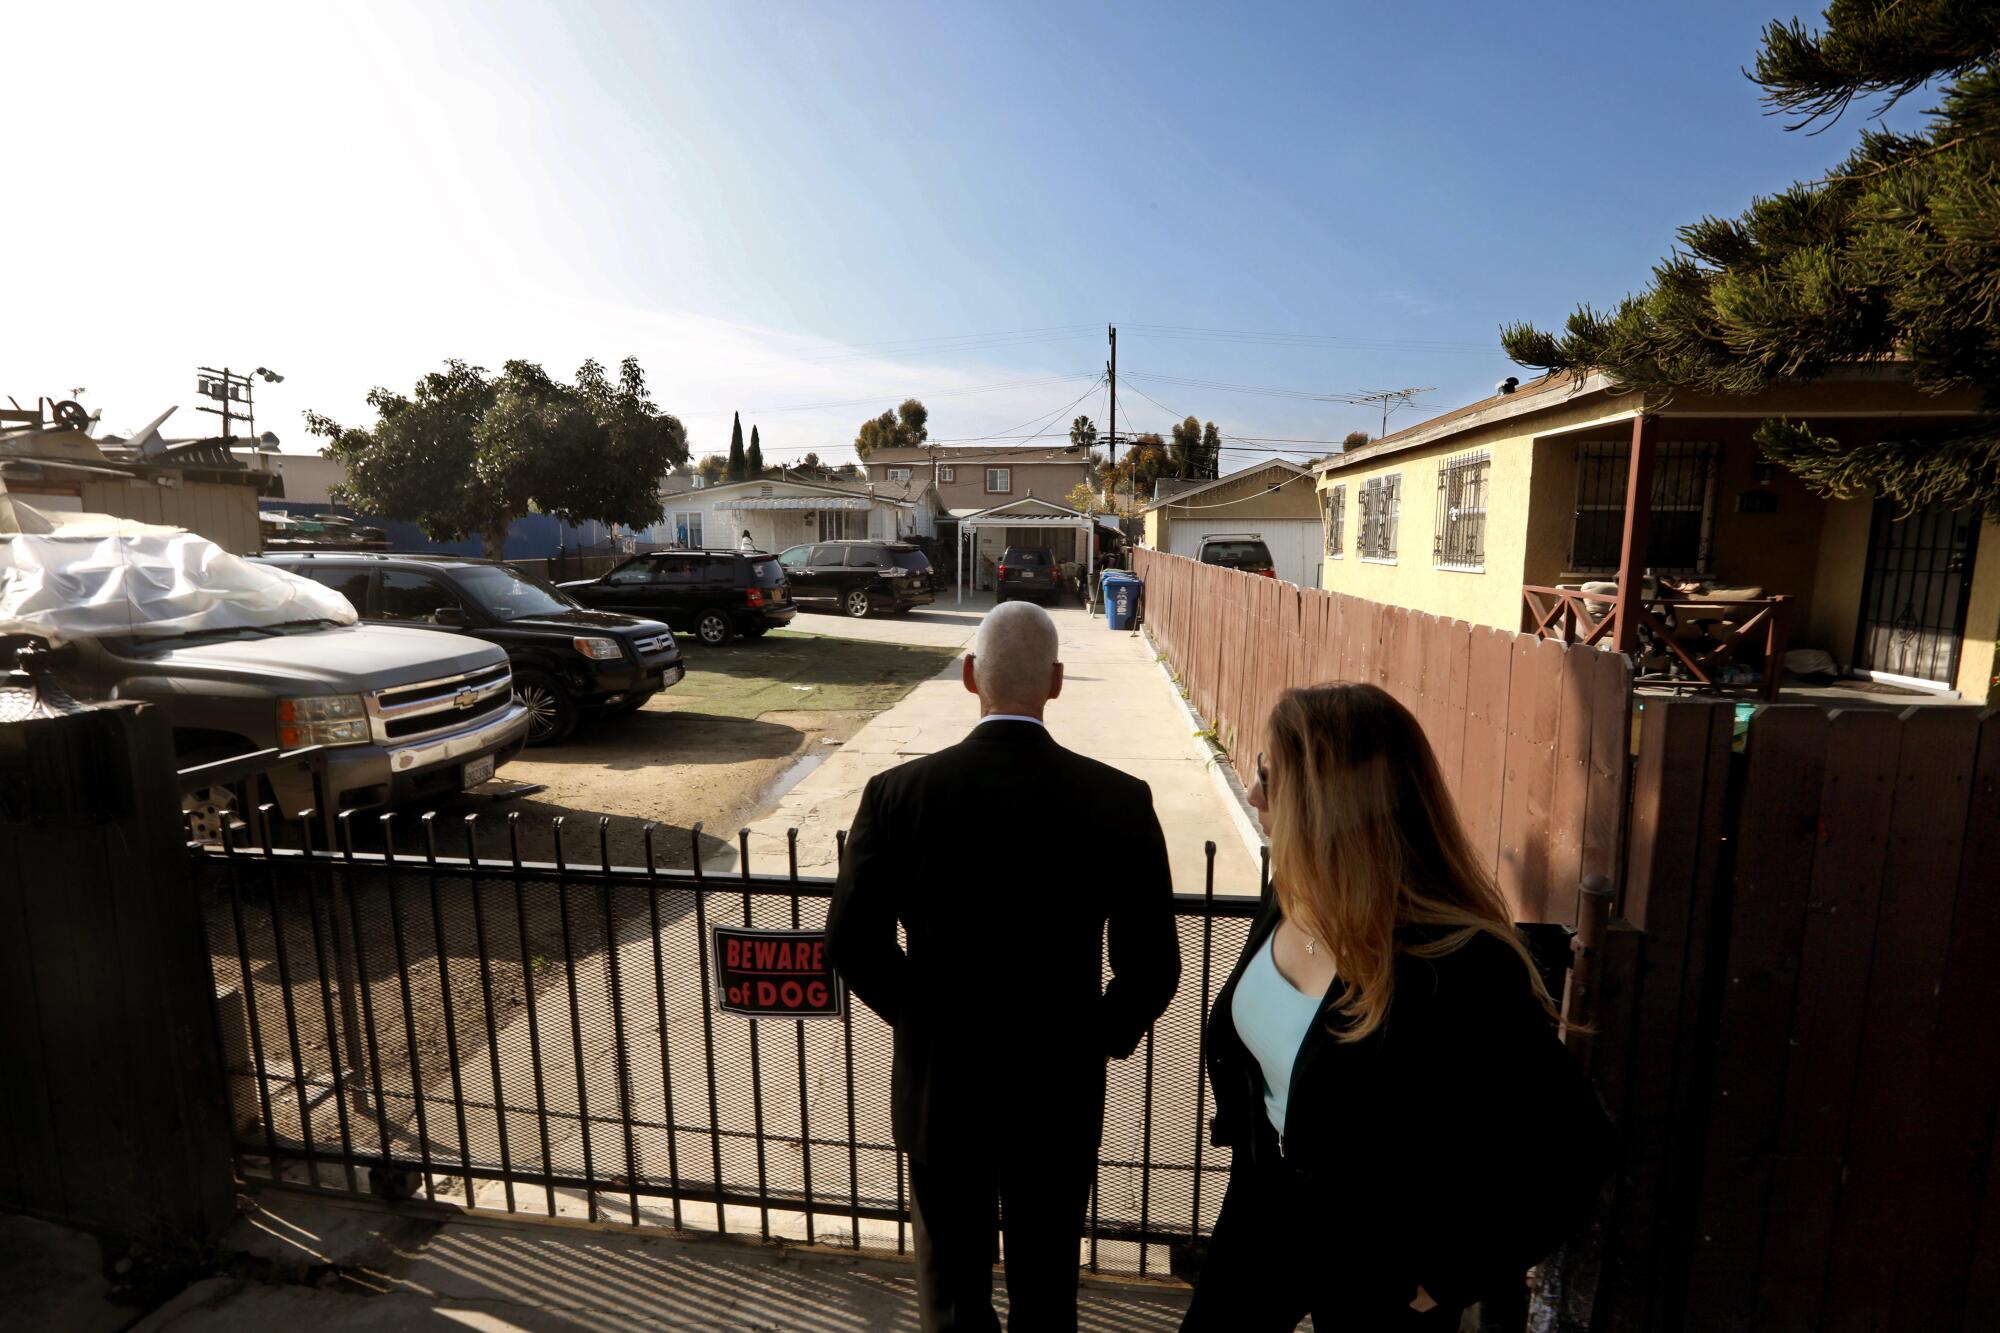  Retired LAPD detectives David Ross, left, and Bertha "B" Durazo stand outside Ruby Scott's former home in Watts.